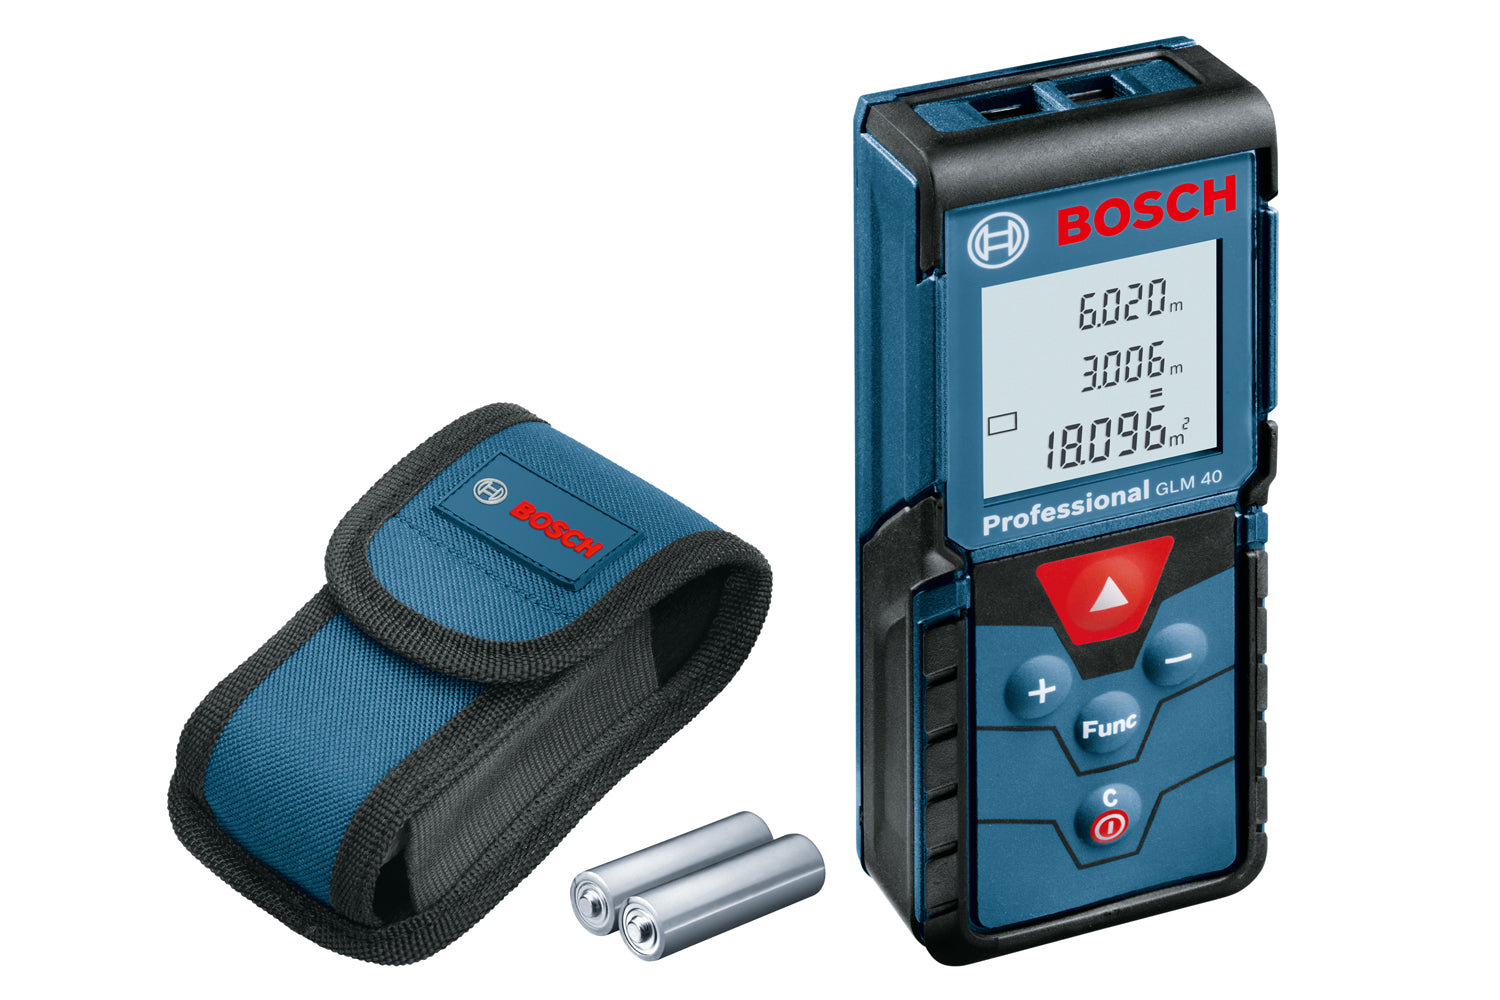 Bosch Professional Laser Measure GLM 40 0601072900 Power Tool Services